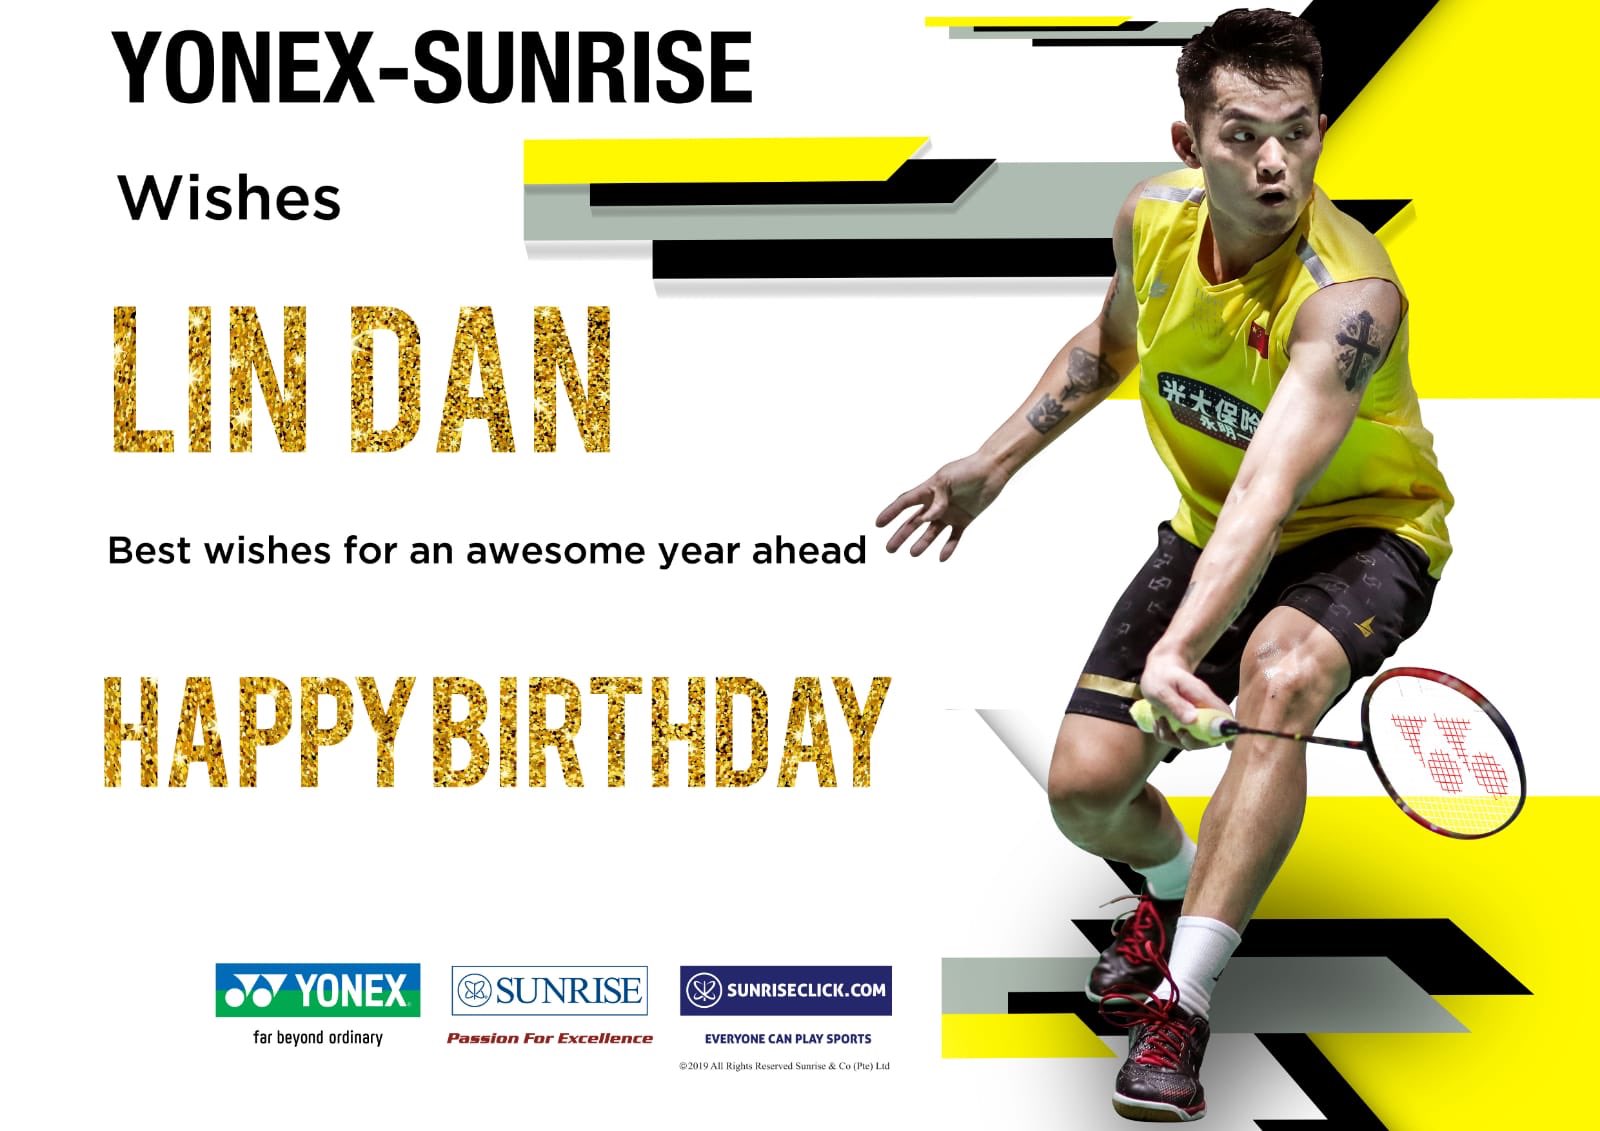  wishes superstar Lin Dan a very happy birthday with greetings for a successful year ahead! 